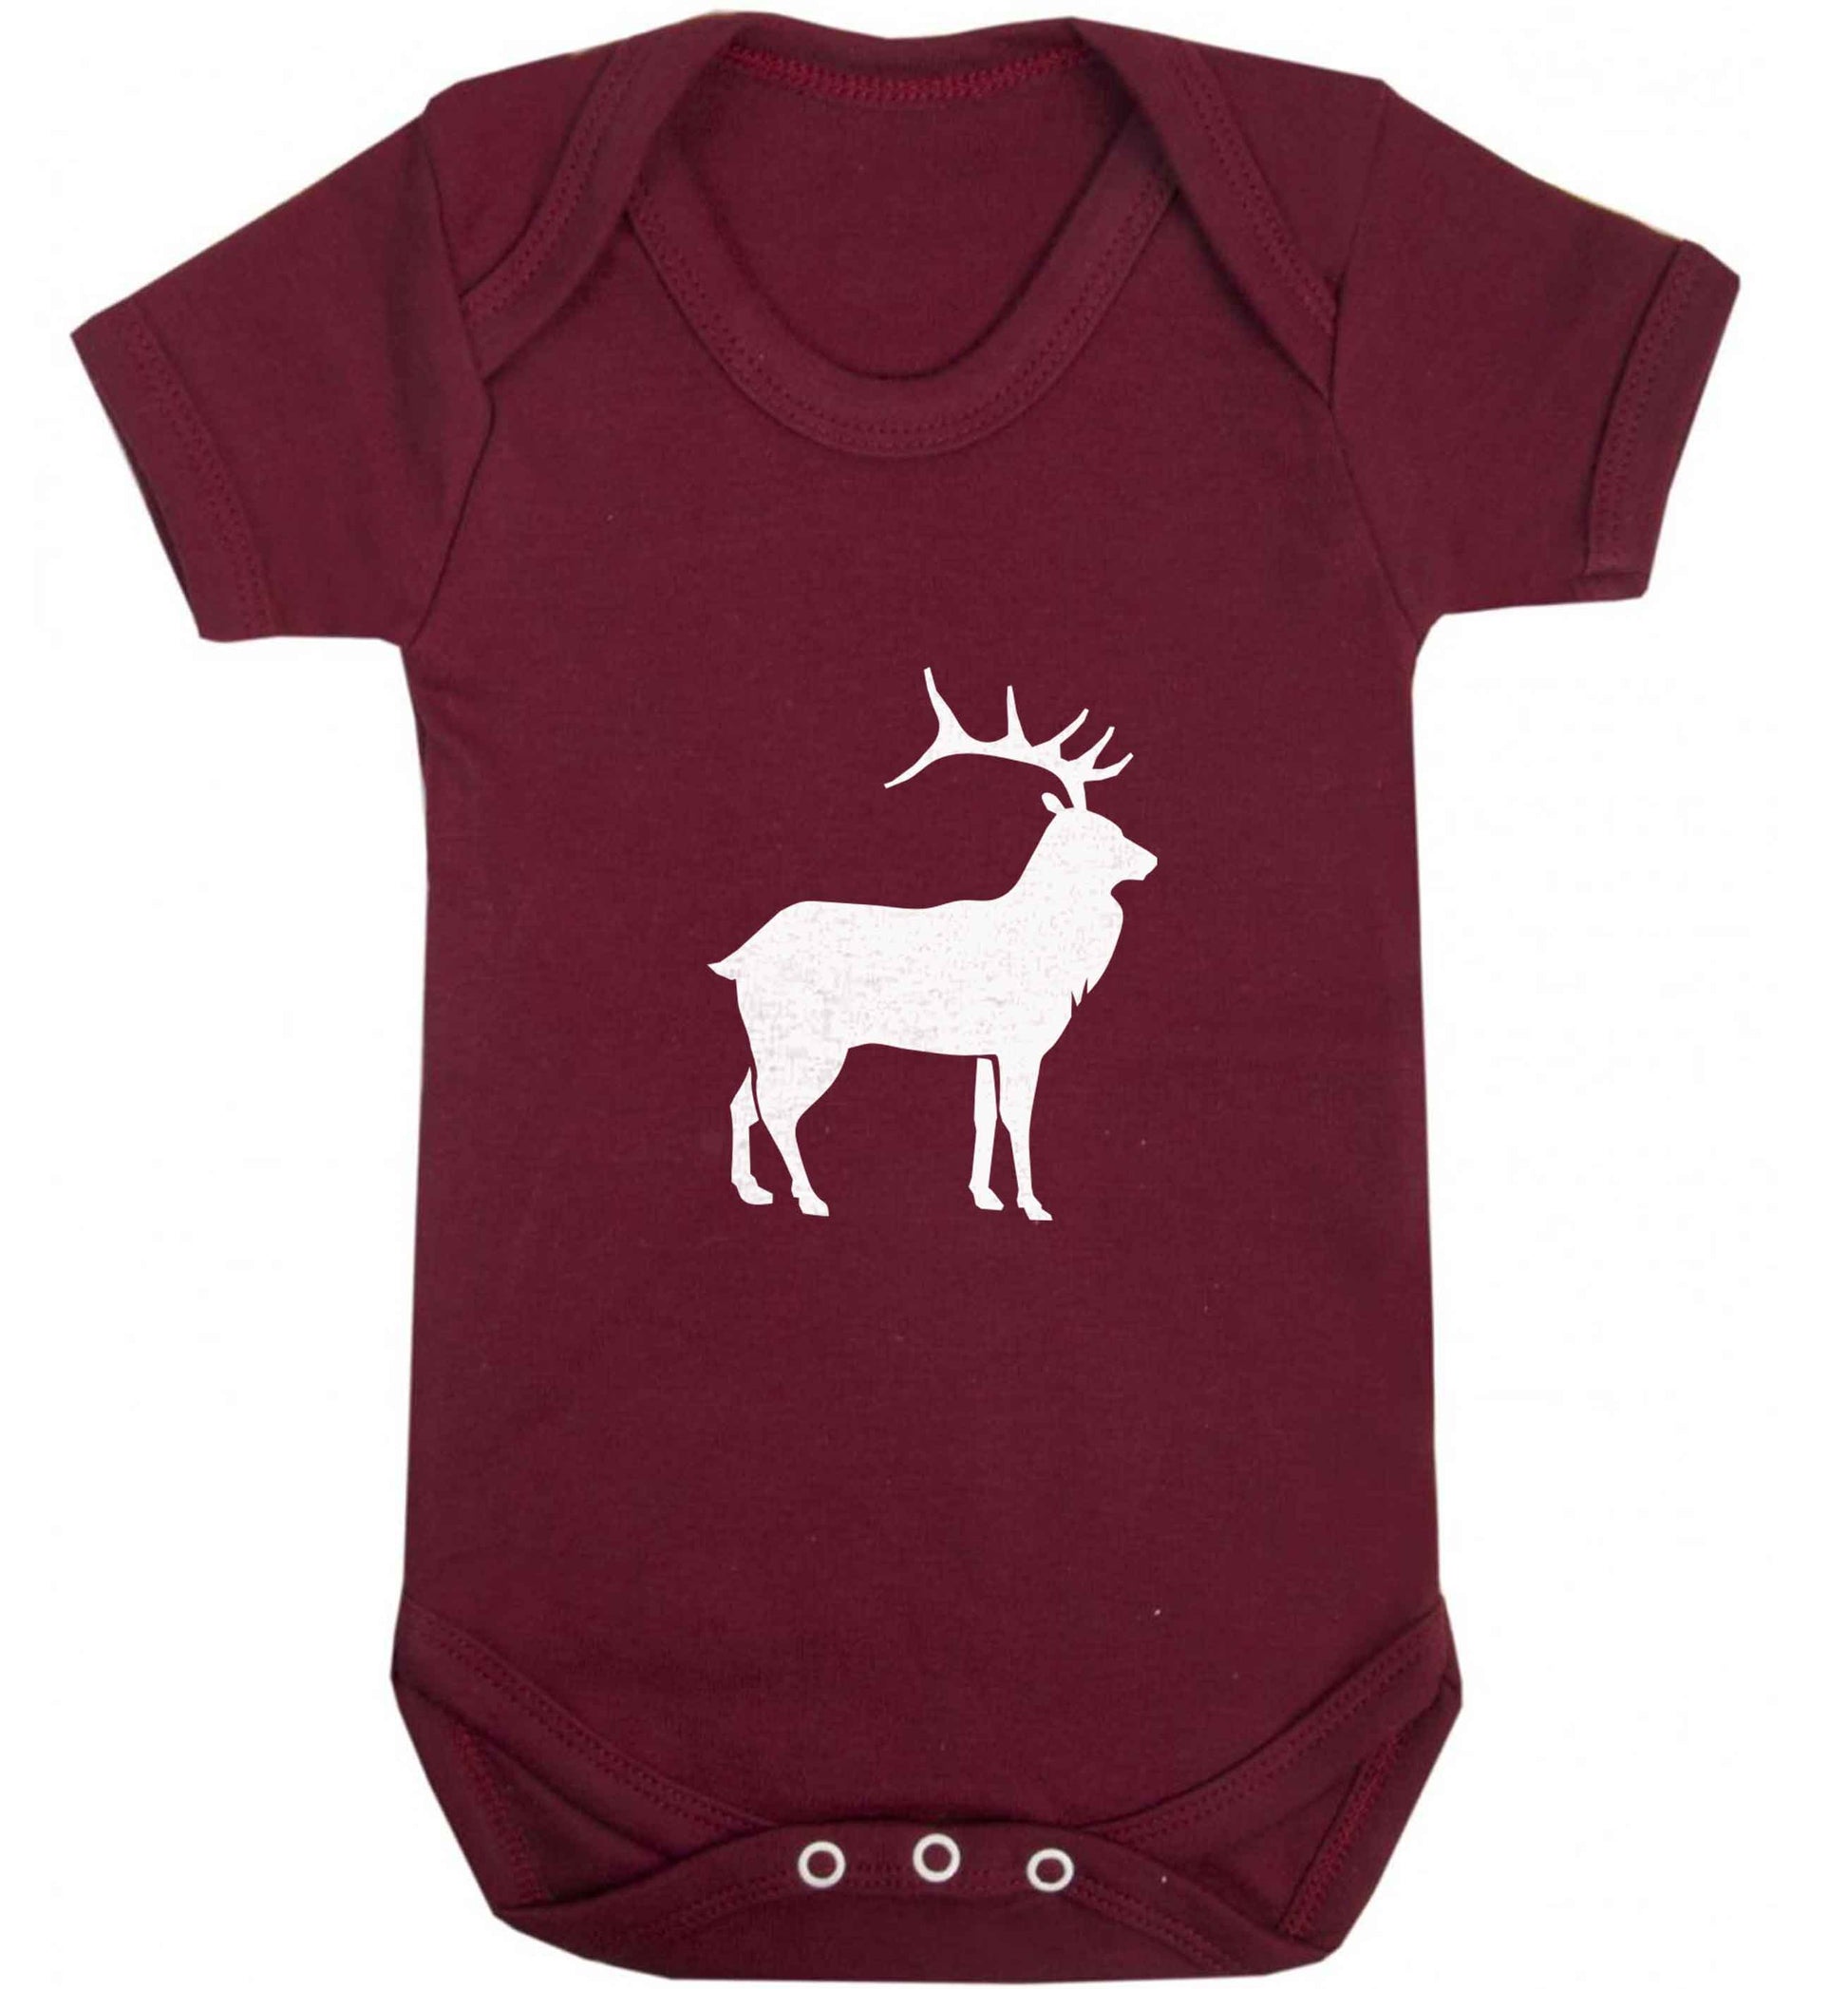 Green stag baby vest maroon 18-24 months